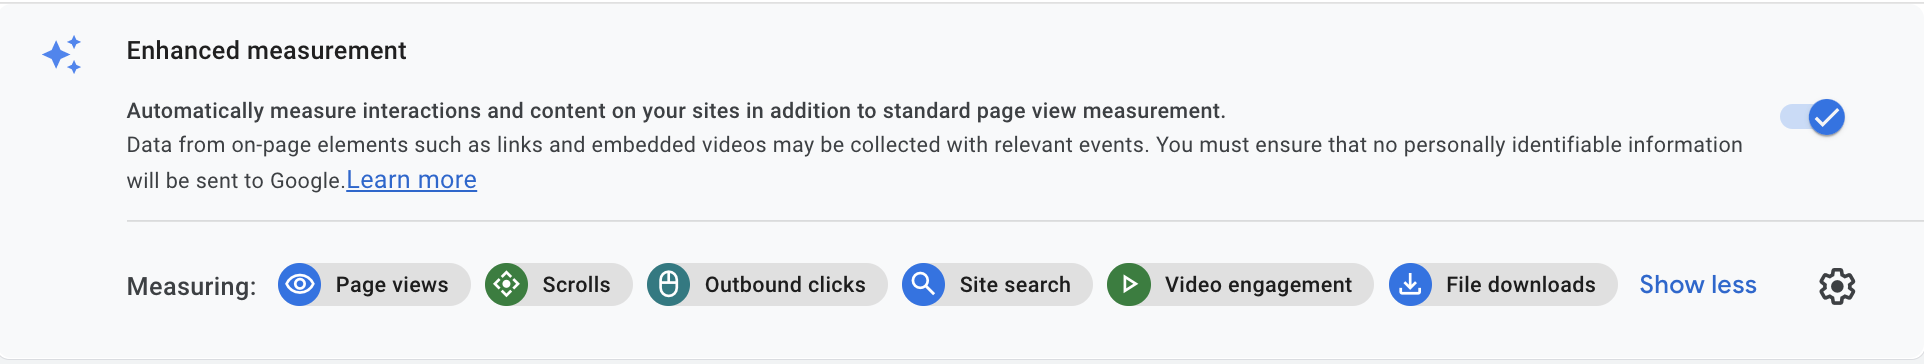 GA4 includes enhanced measurement features, including page views, scrolls, outbound clicks, site search, video engagement and file downloads, so you don't need to set these up yourself